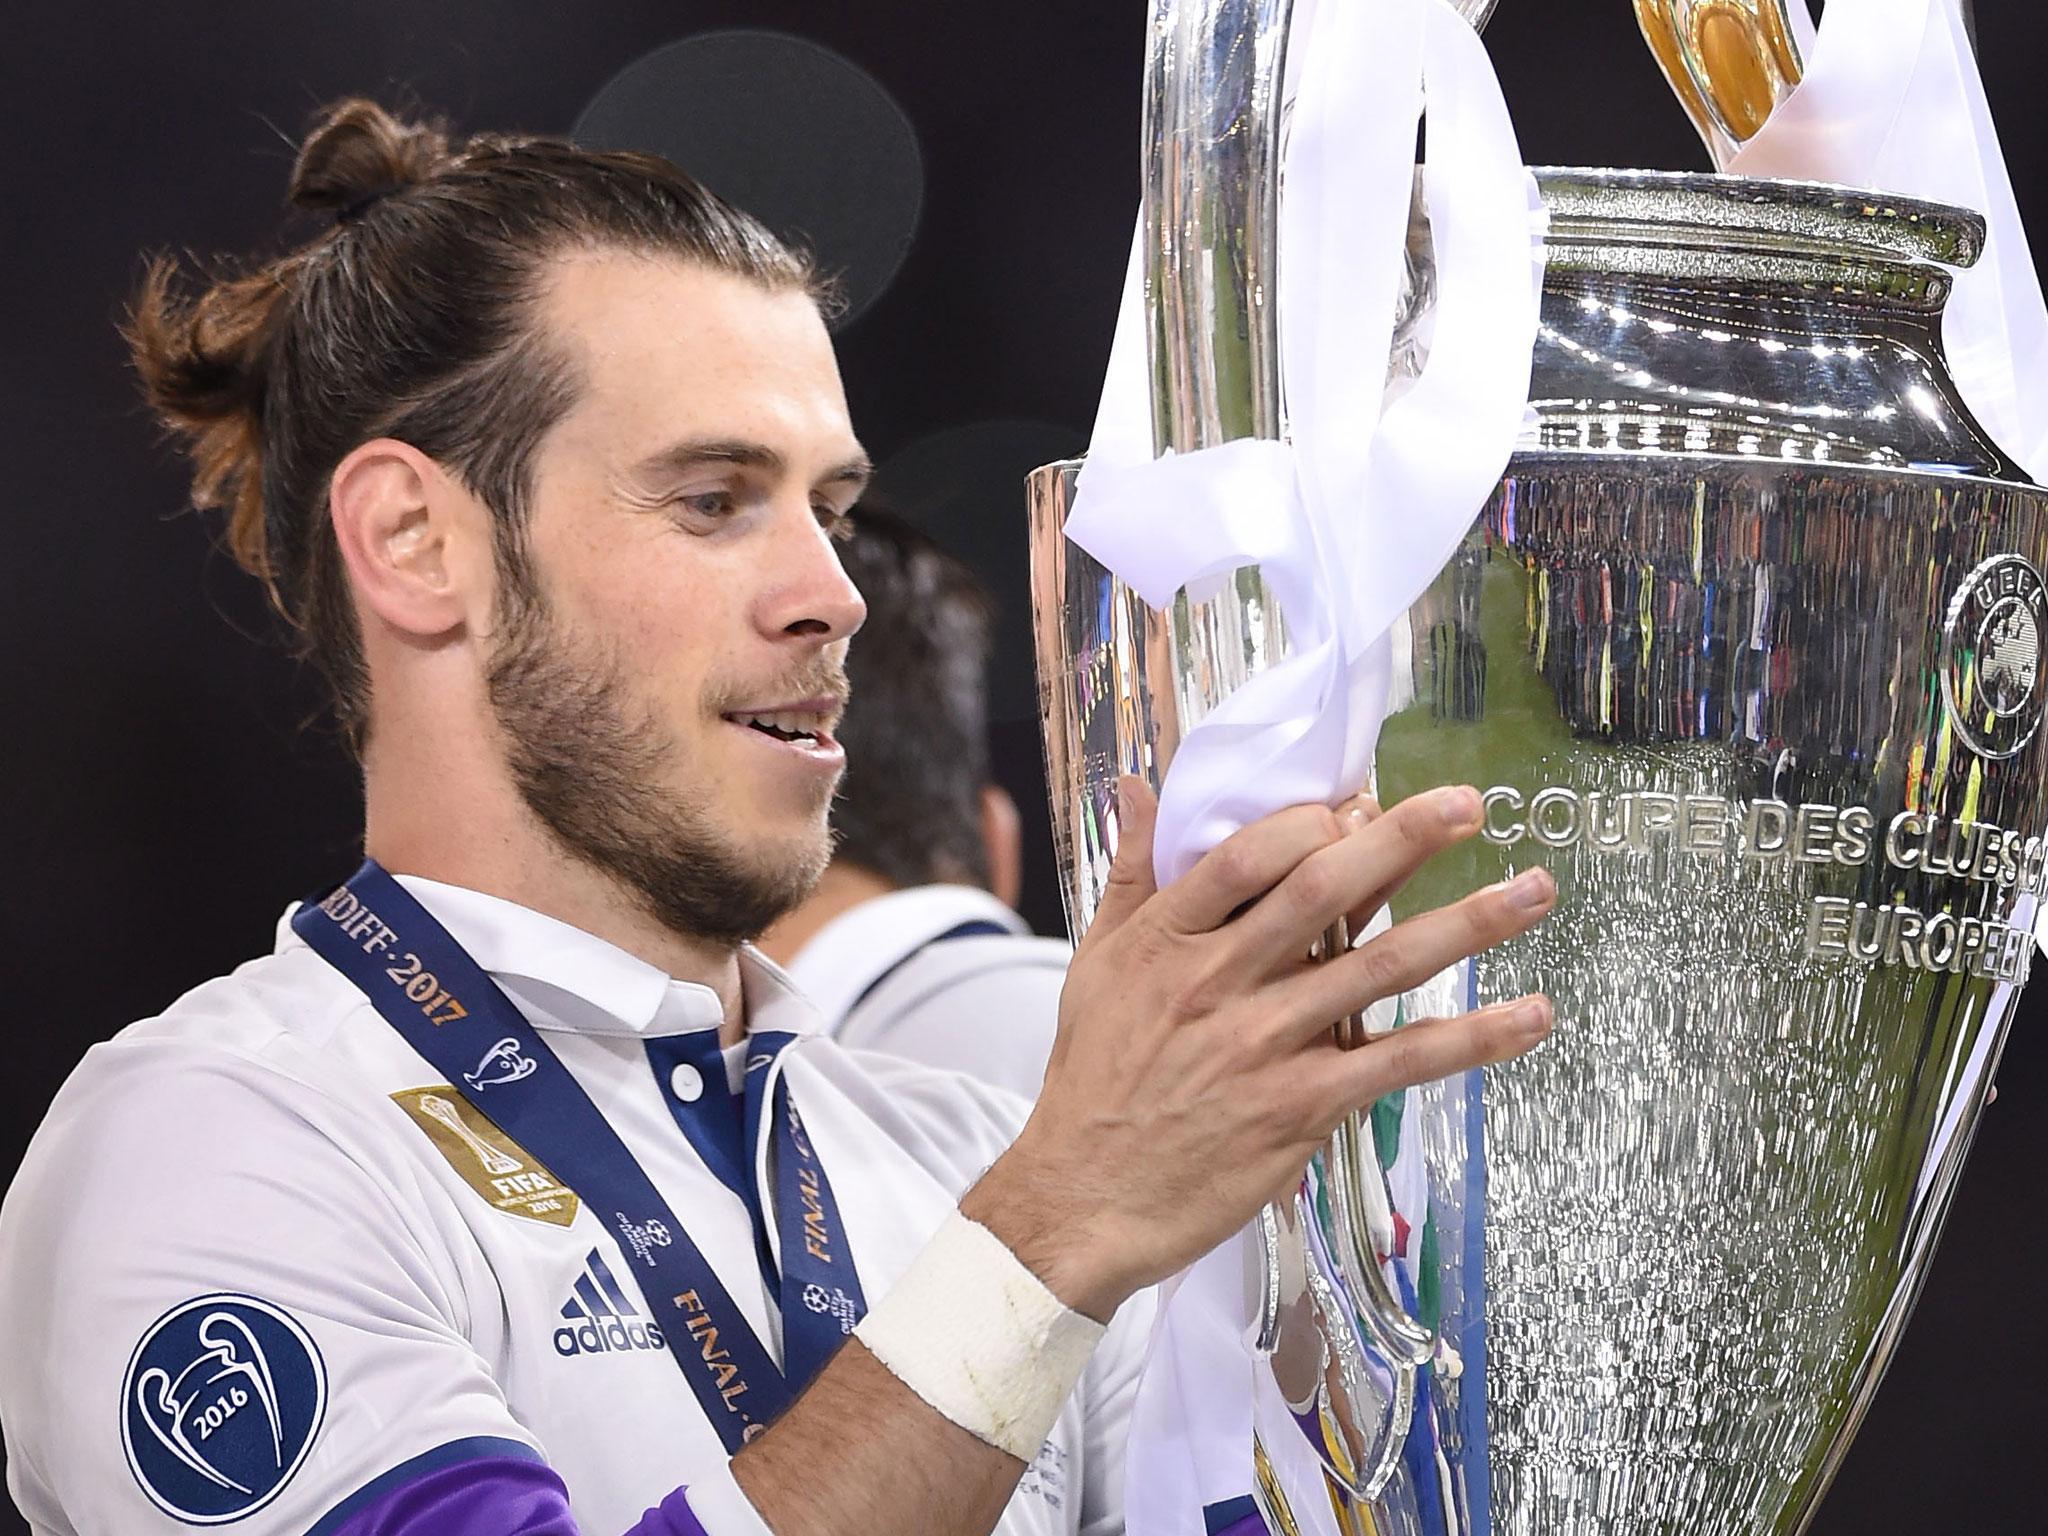 After Champions League win, future unclear for Real Madrid stars Ronaldo,  Bale